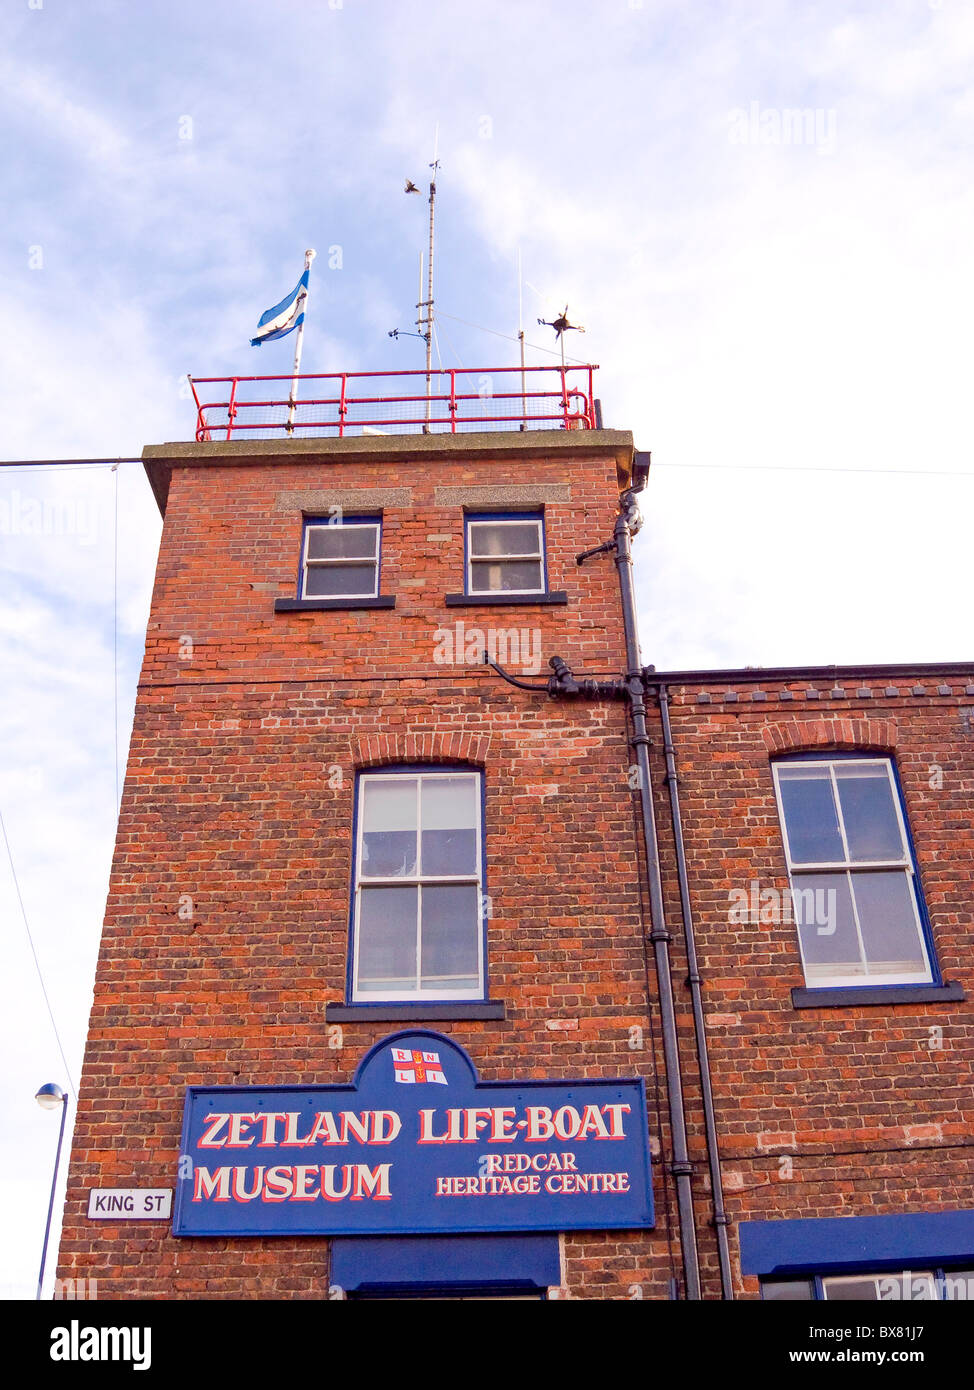 The Zetland Lifeboat Museum in Redcar has a coastguard lookout station at the top of the tower Stock Photo